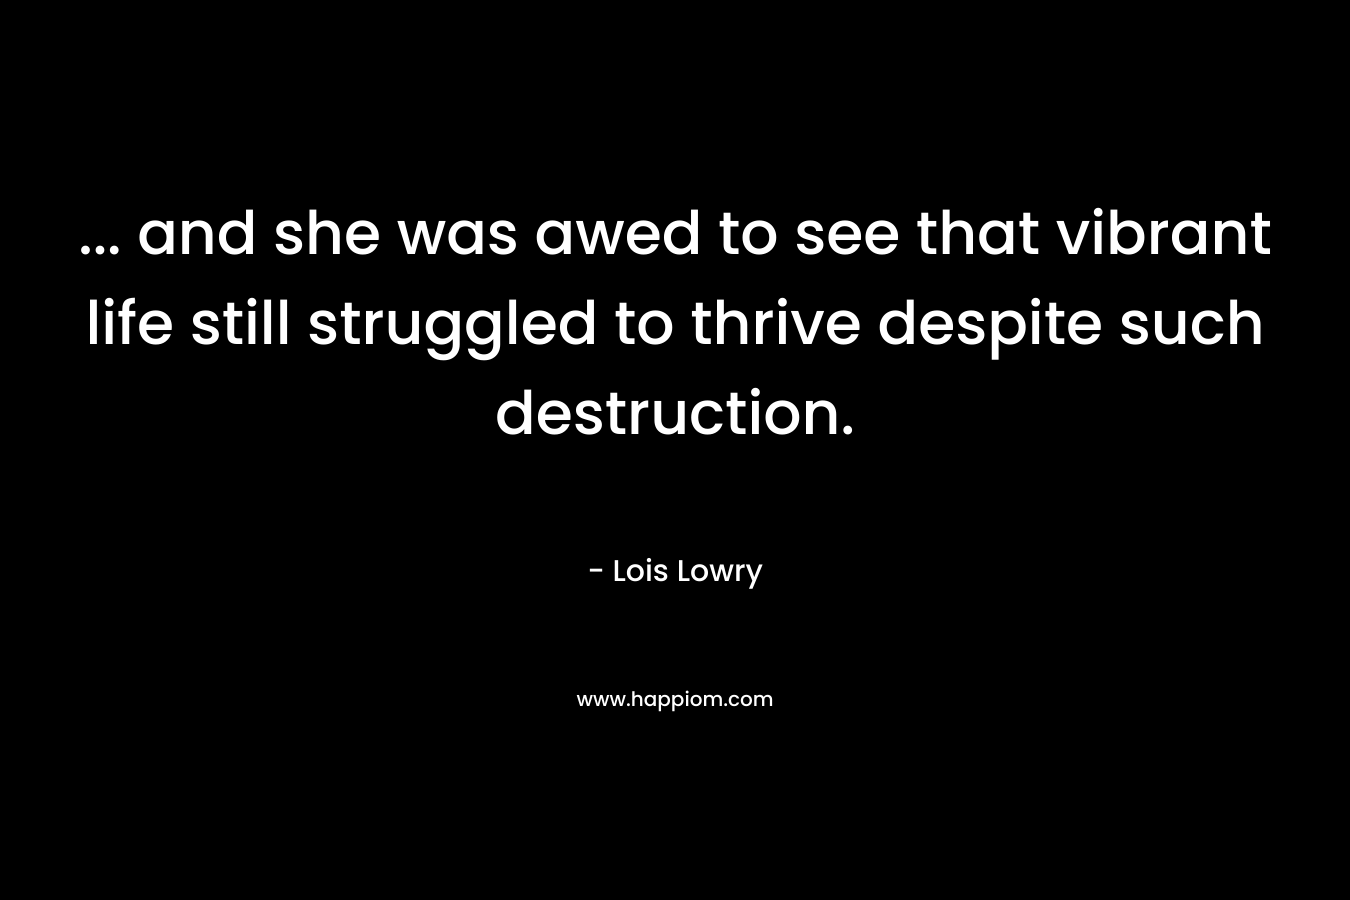 … and she was awed to see that vibrant life still struggled to thrive despite such destruction. – Lois Lowry